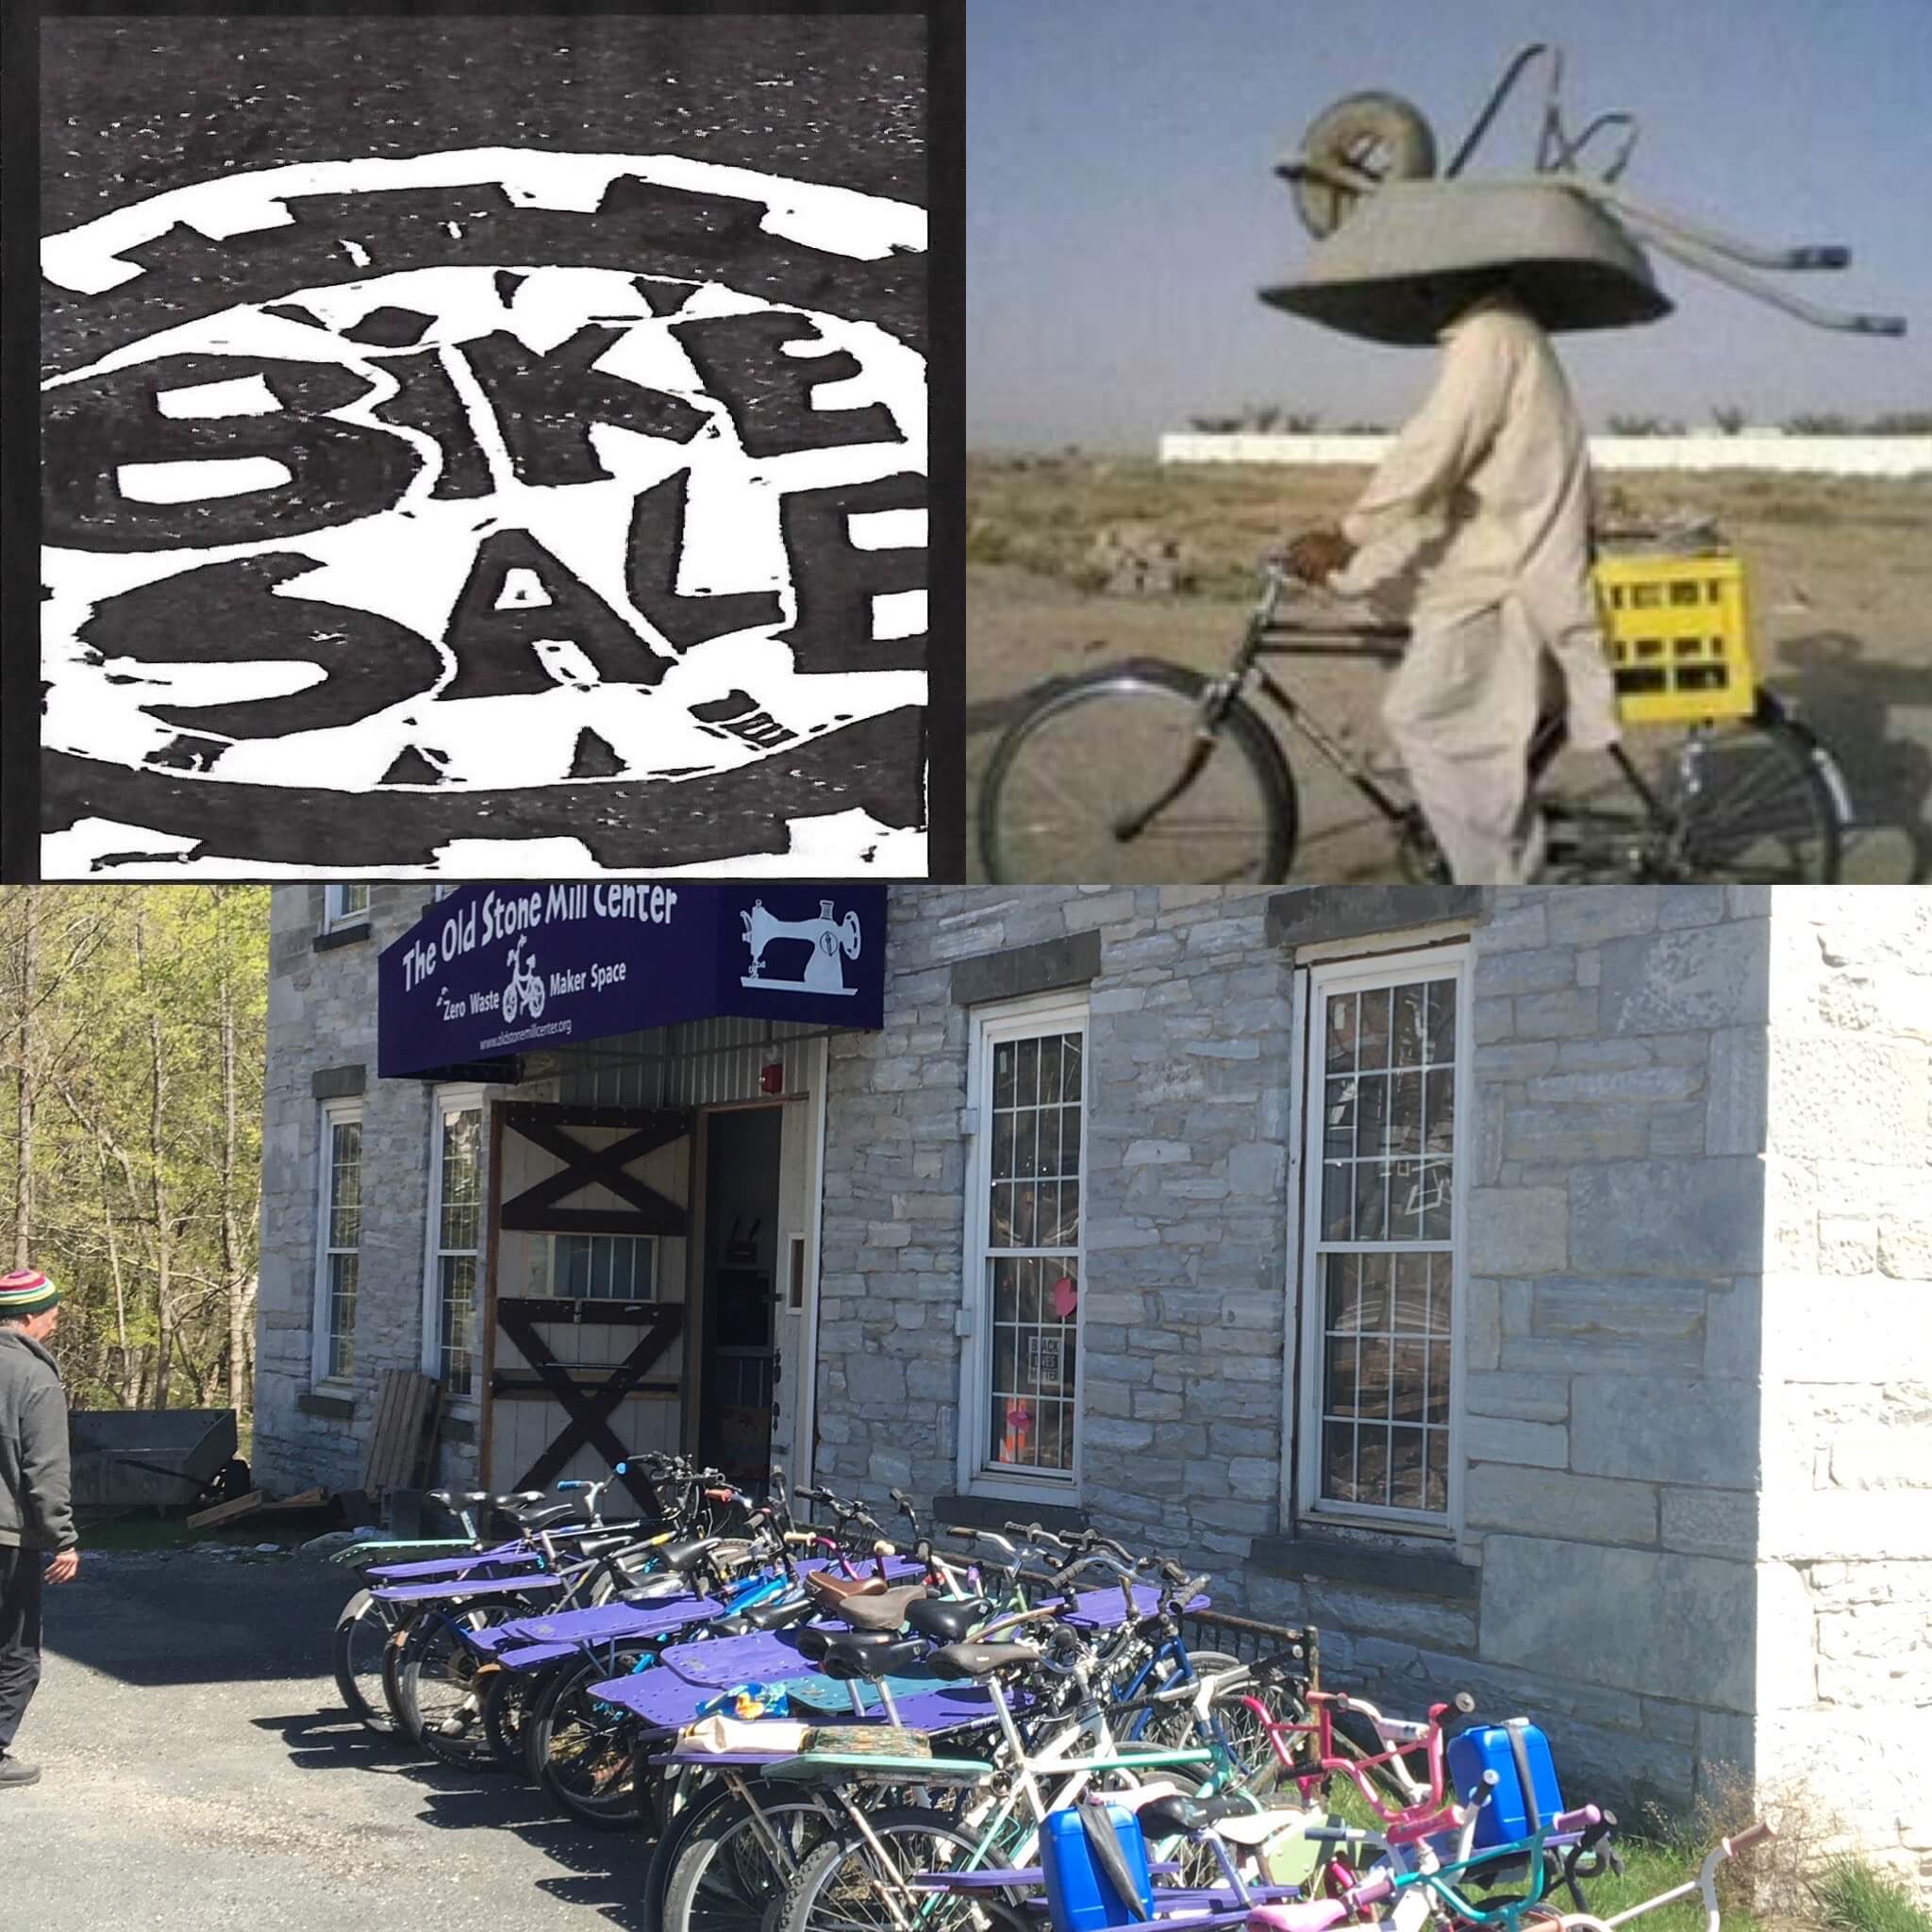 Self-Guided Tour of Bike Center and Gently-Used Bike Sale